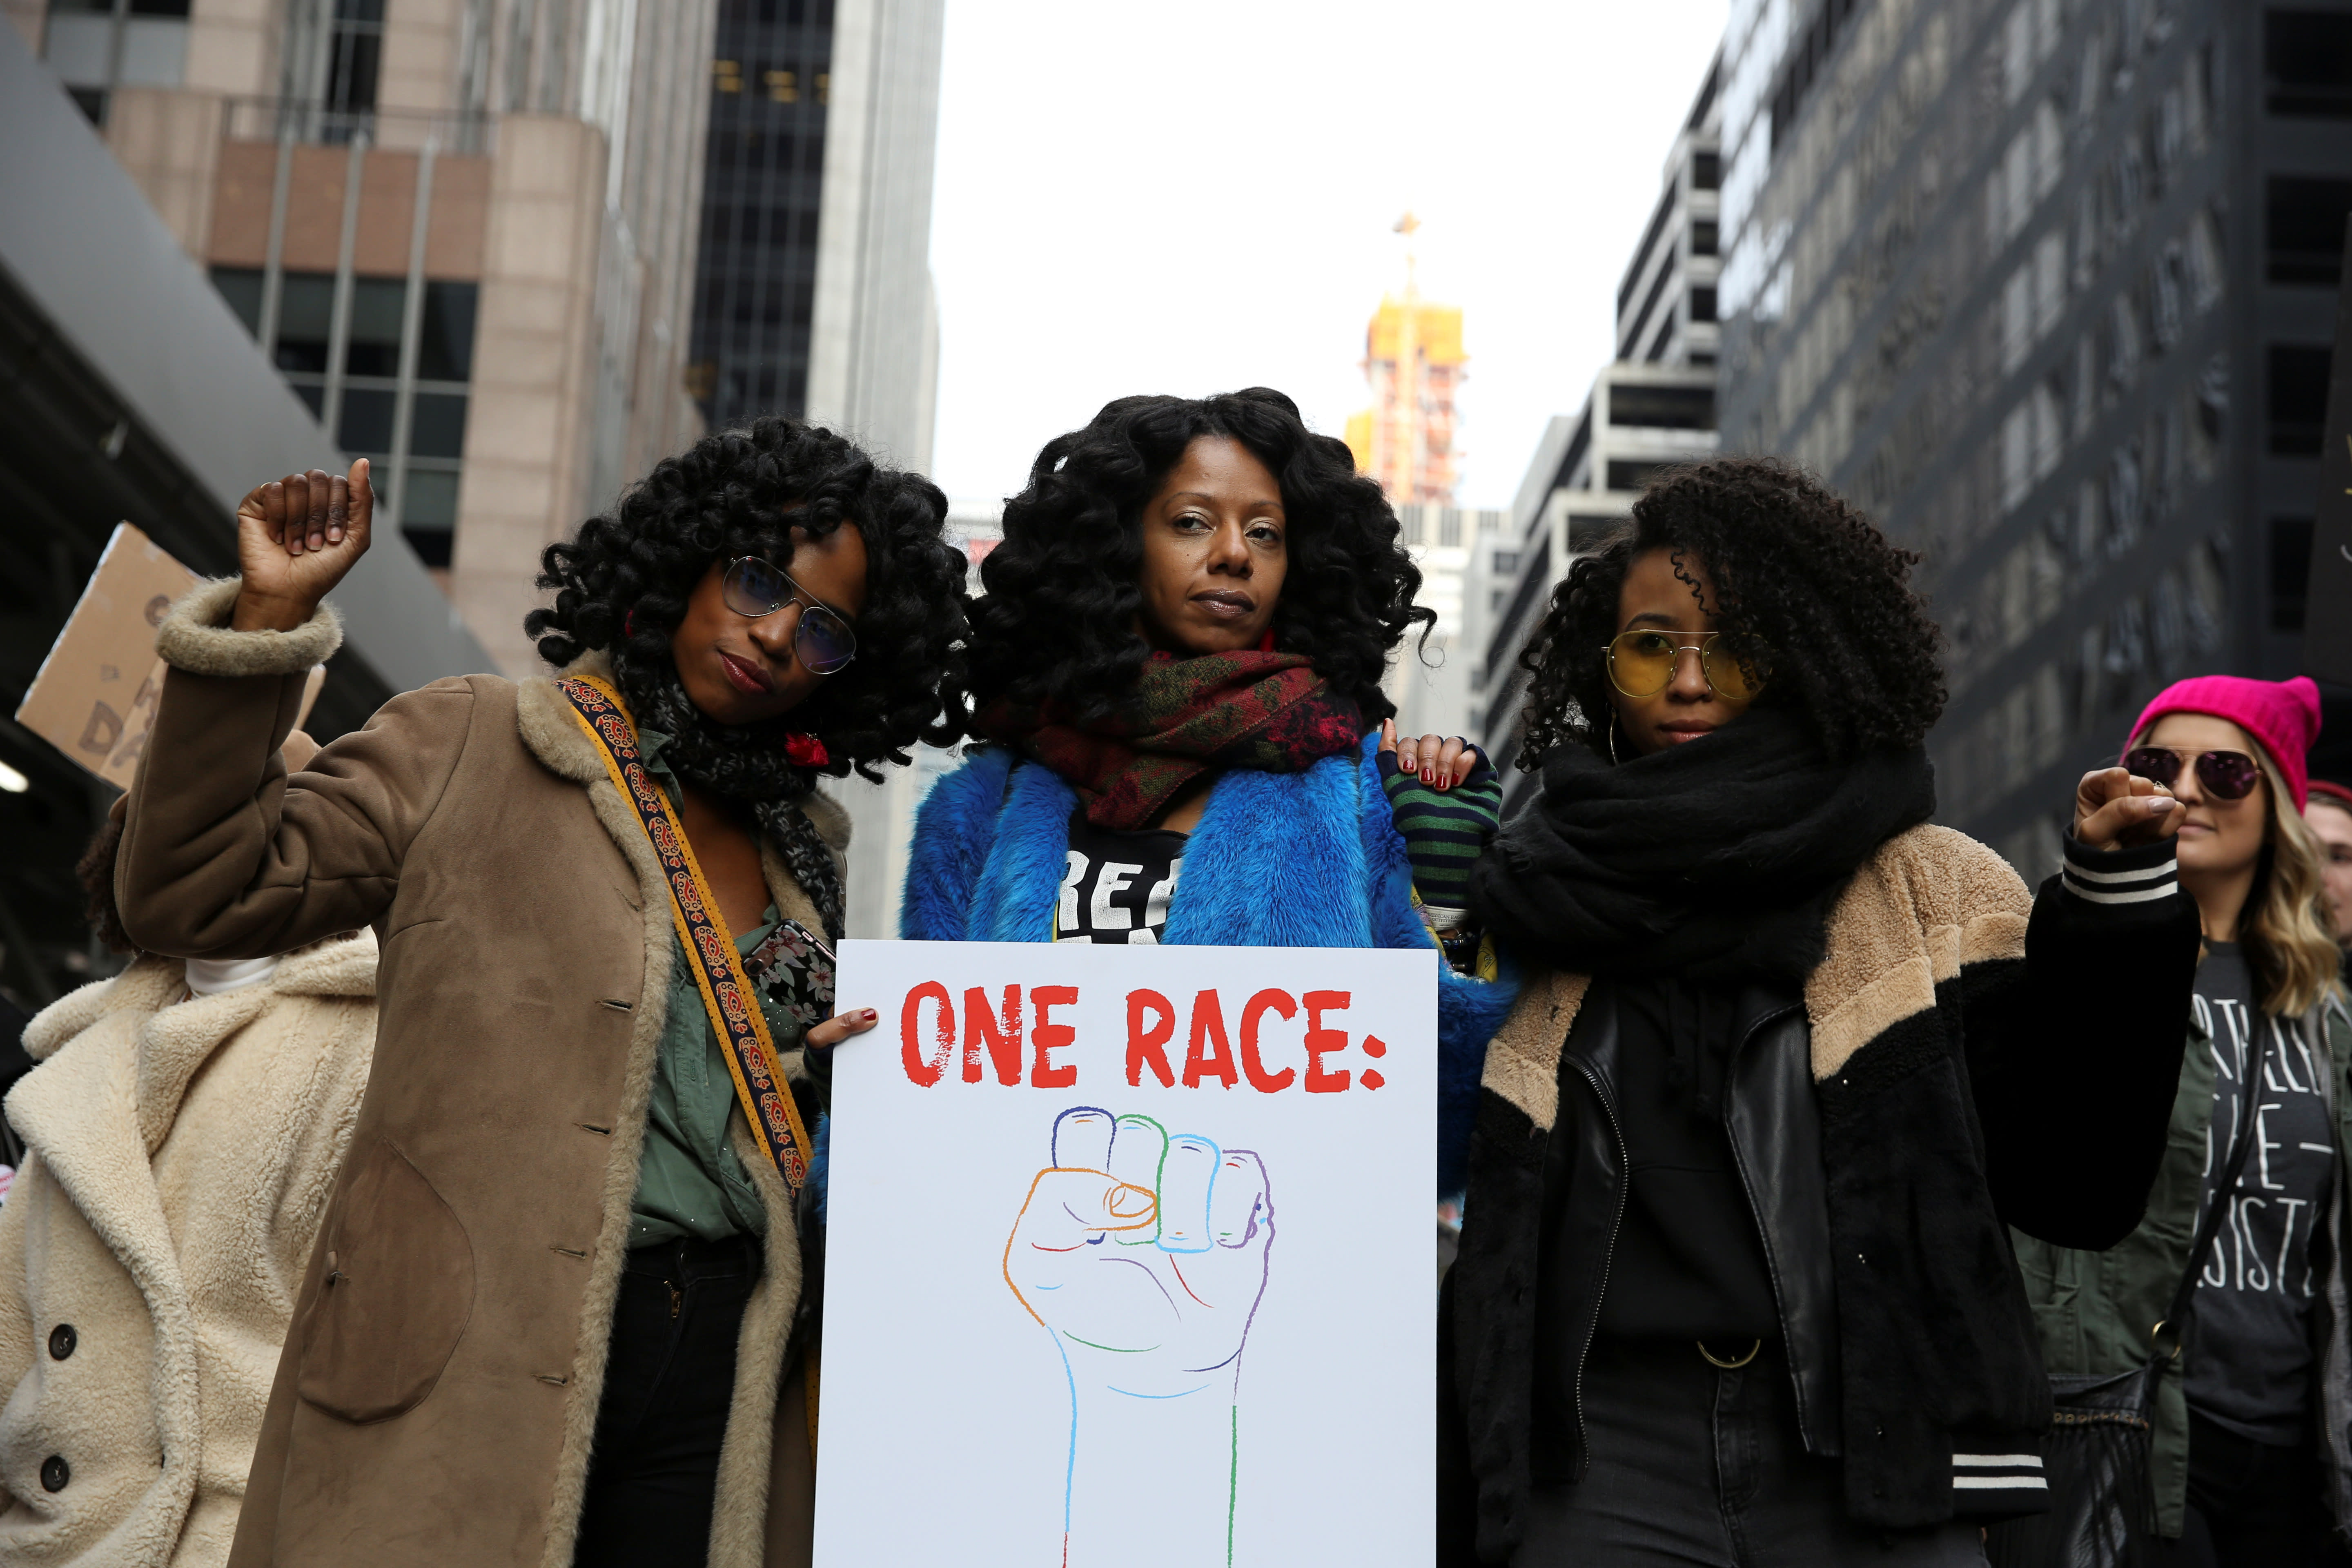 Demonstrators take part in the Women's March in Manhattan in New York City (REUTERS/Caitlin Ochs)